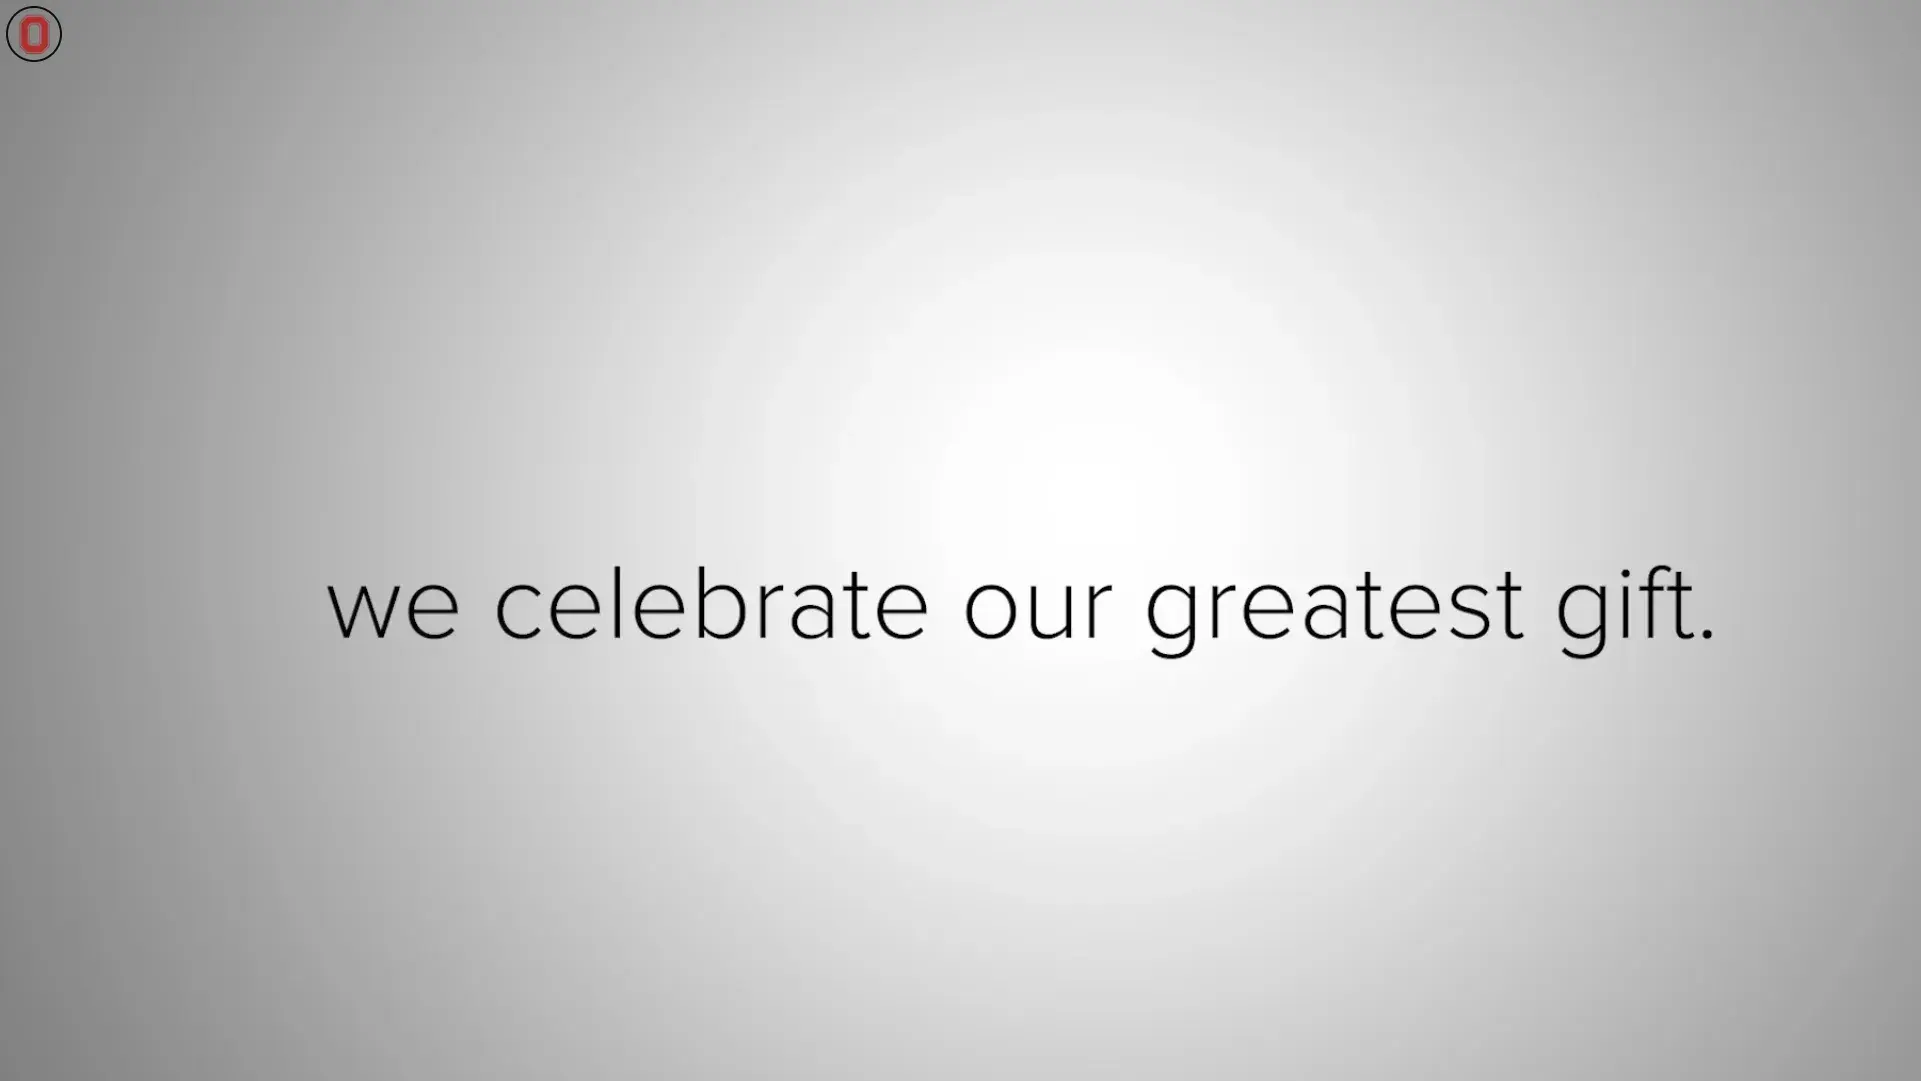 white and gray image with the text we celebrate our greatest gift centered in the middle